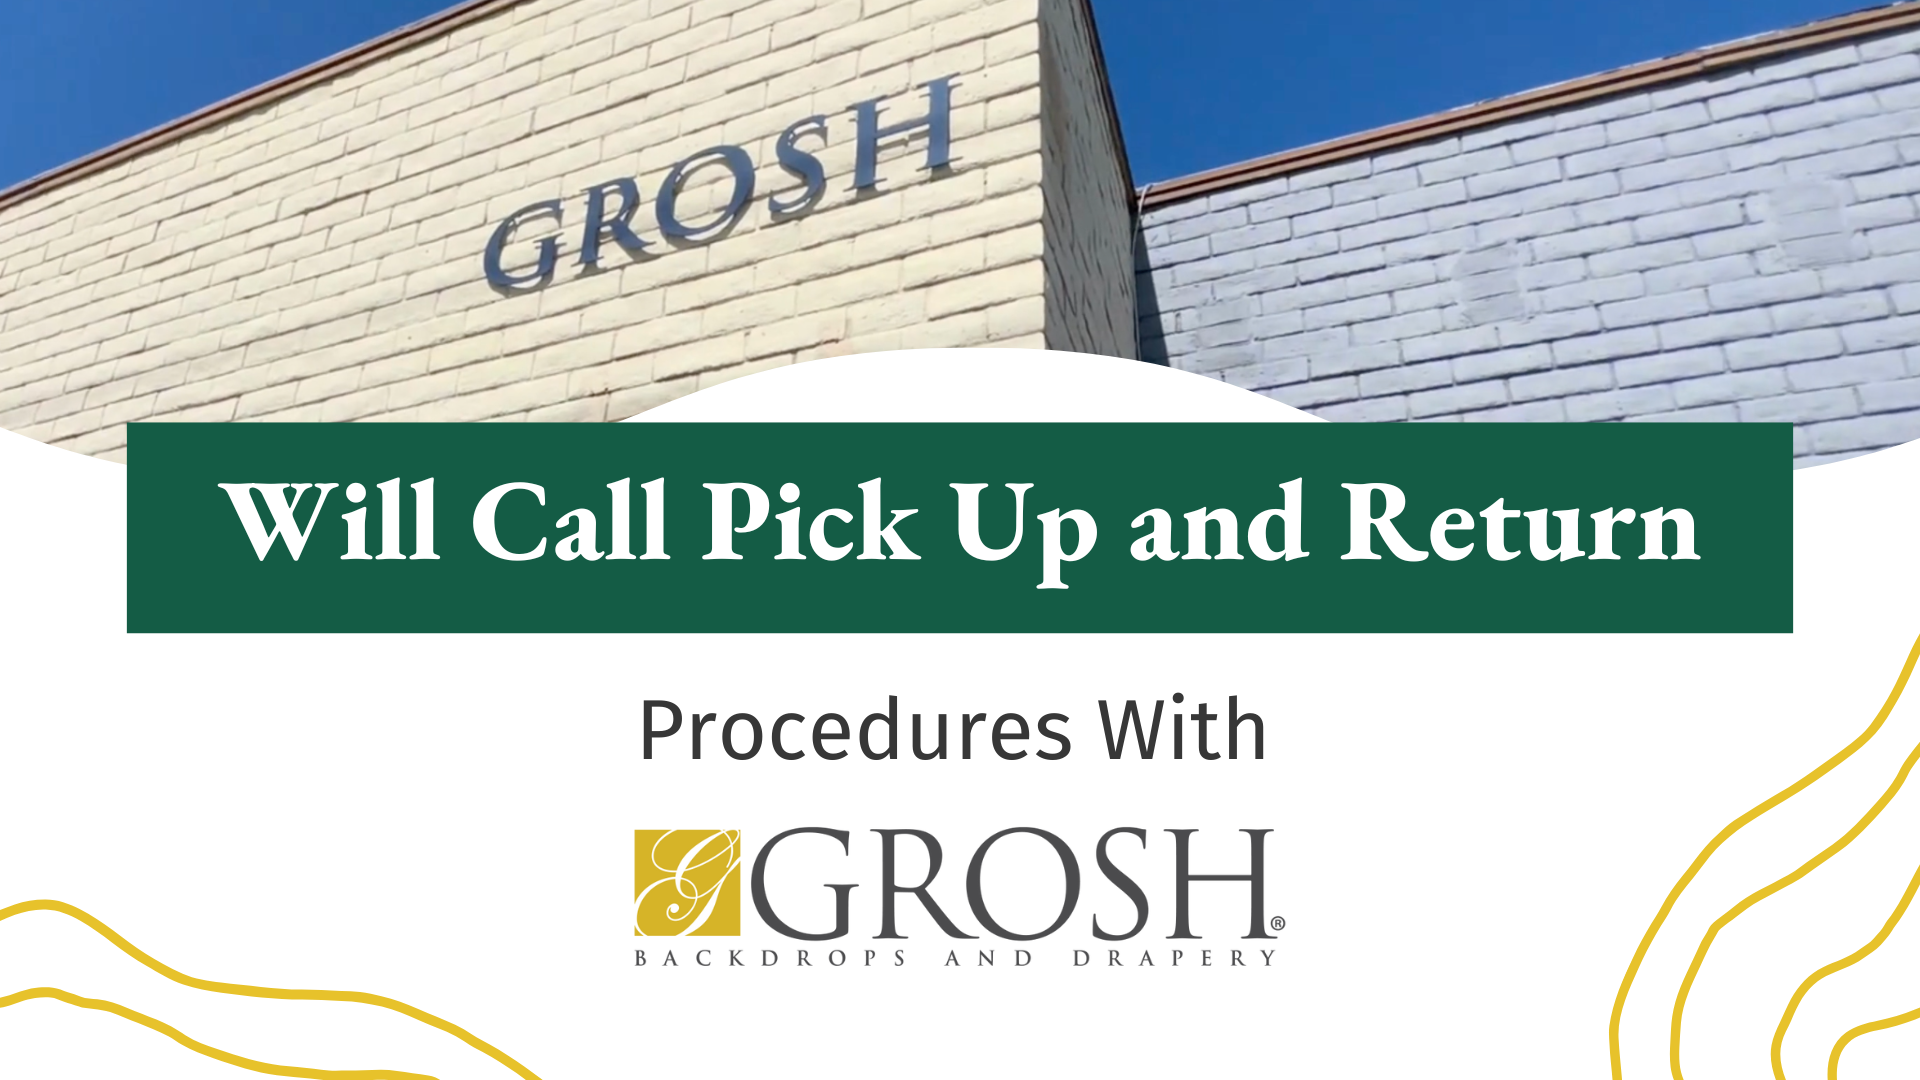 Will Call Pick Up and Return Procedures With Grosh